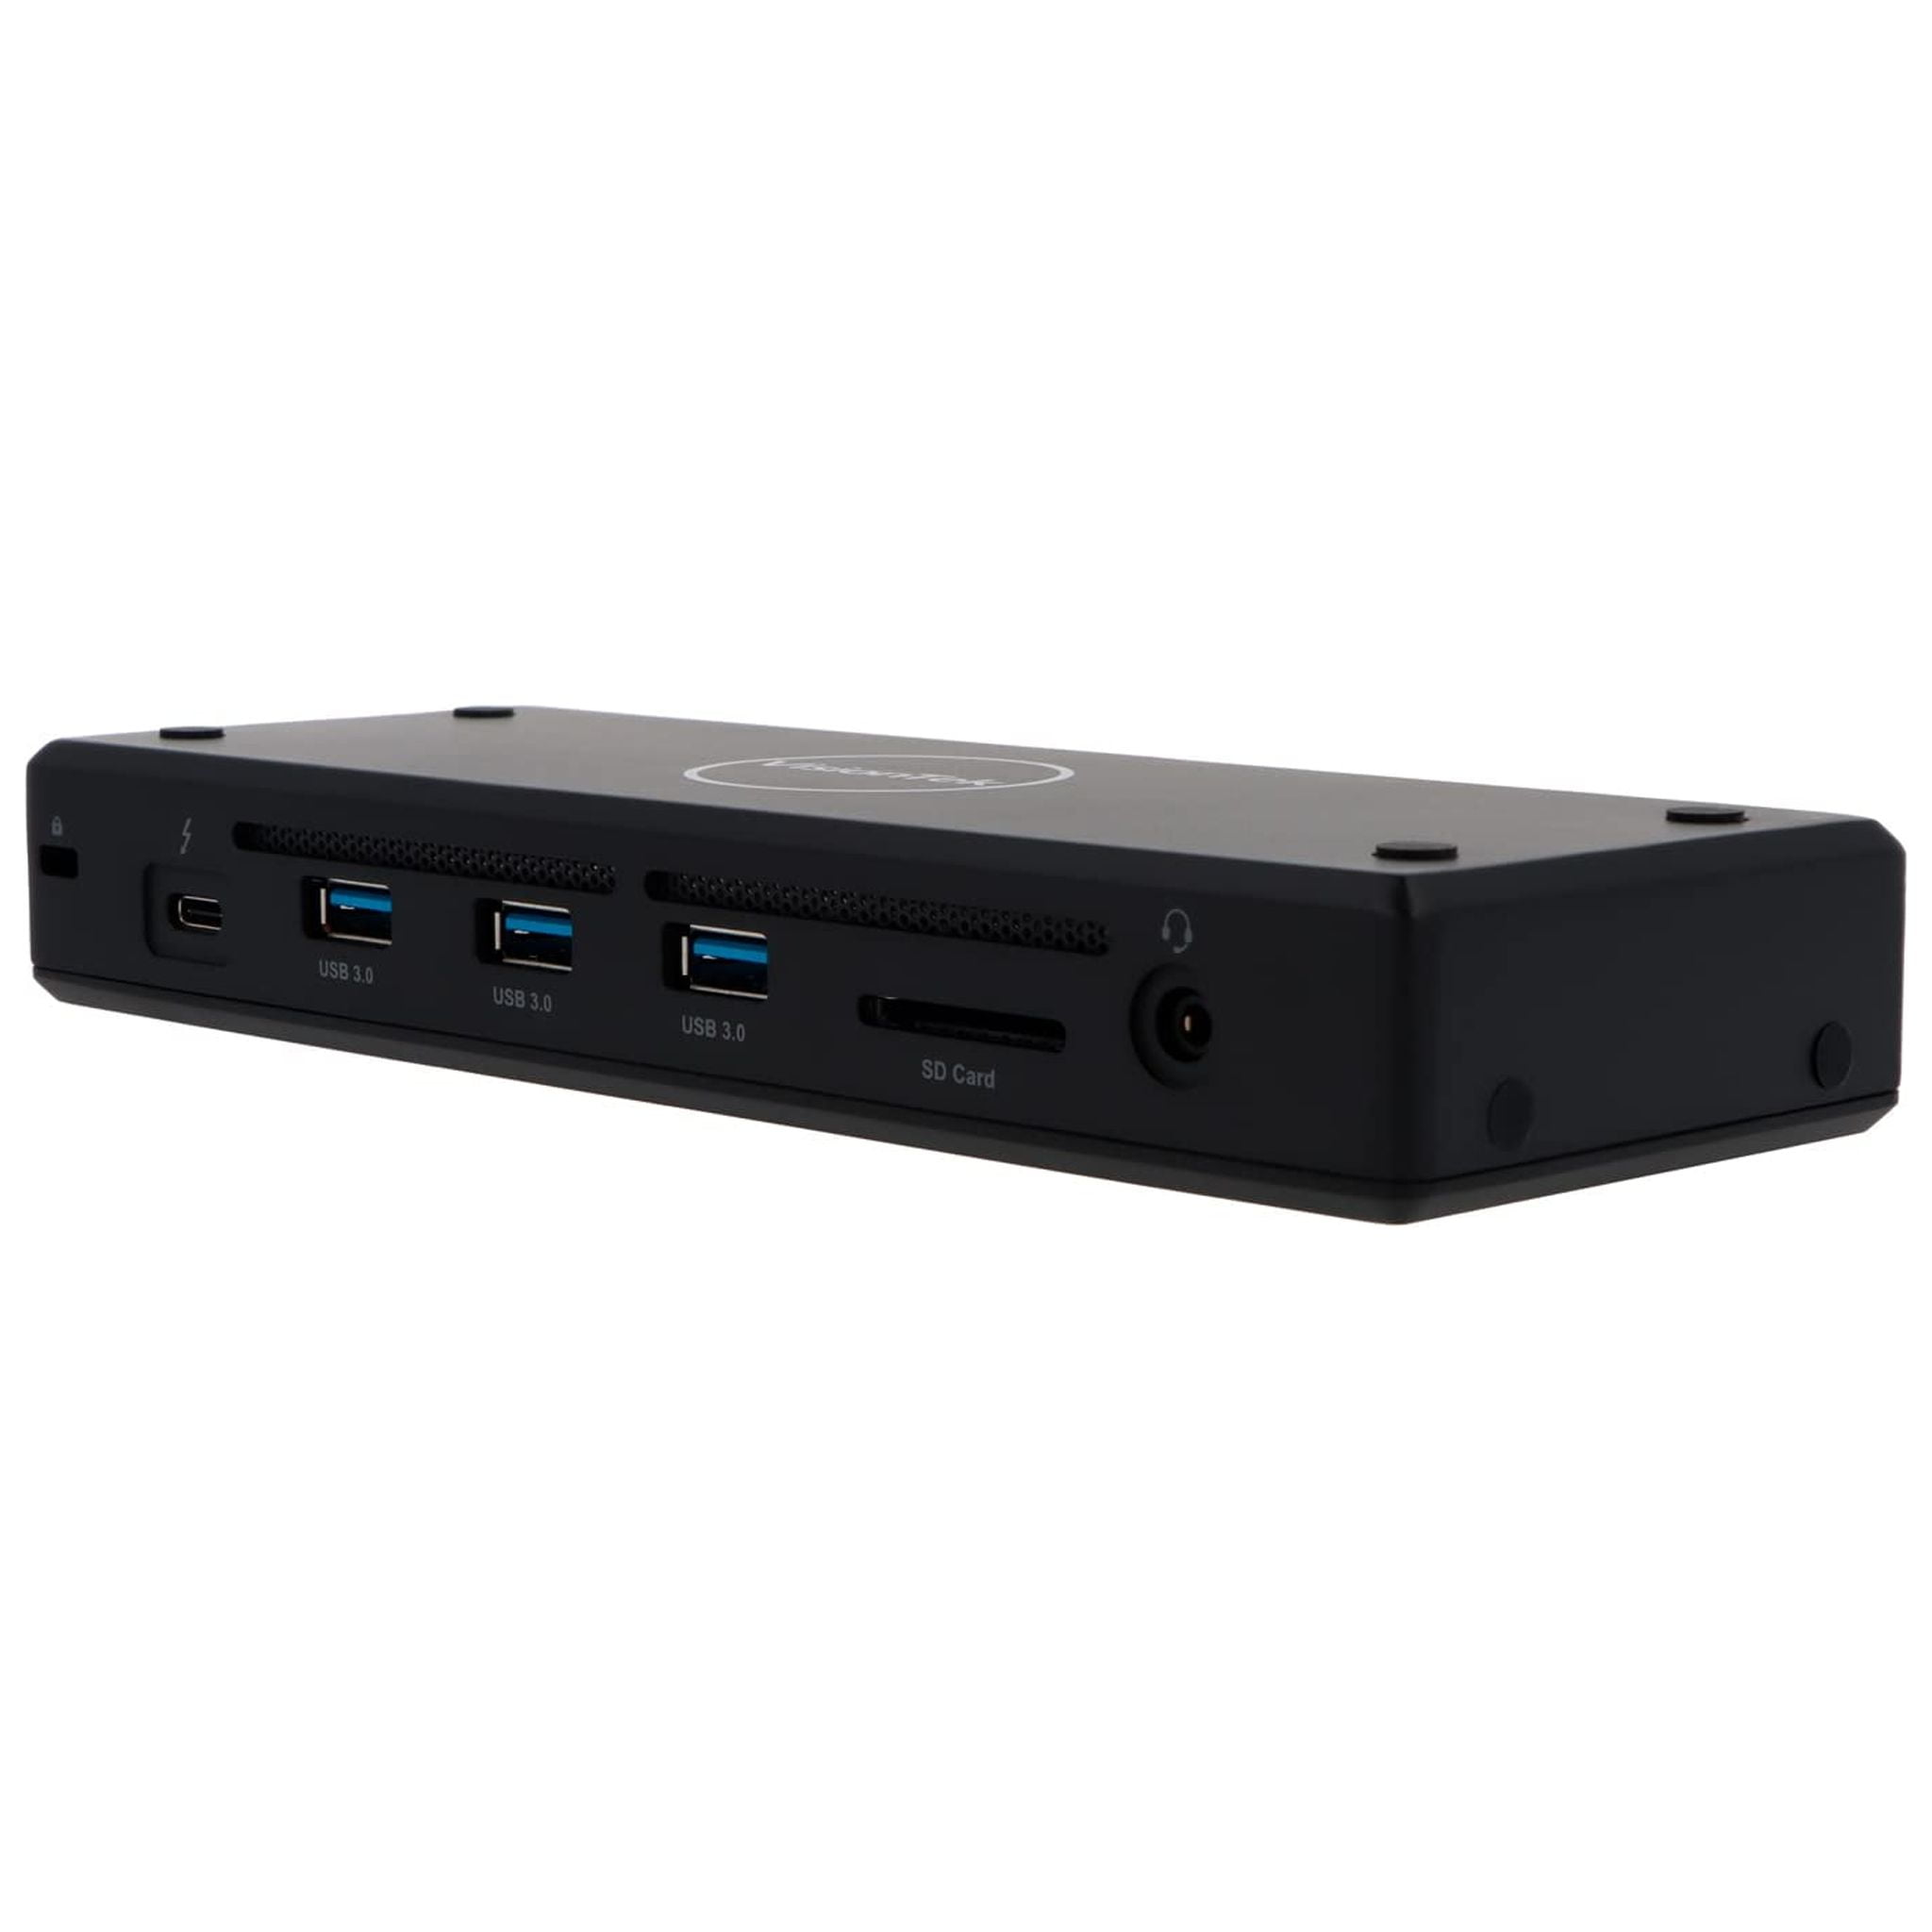 Henge Docks HD04VA13MBPR - Port replicator - 2 x Thunderbolt - for Apple  MacBook Pro with Retina display 13.3 (Late 2012, Early 2013, Late 2013,  Mid 2014, Early 2015) 